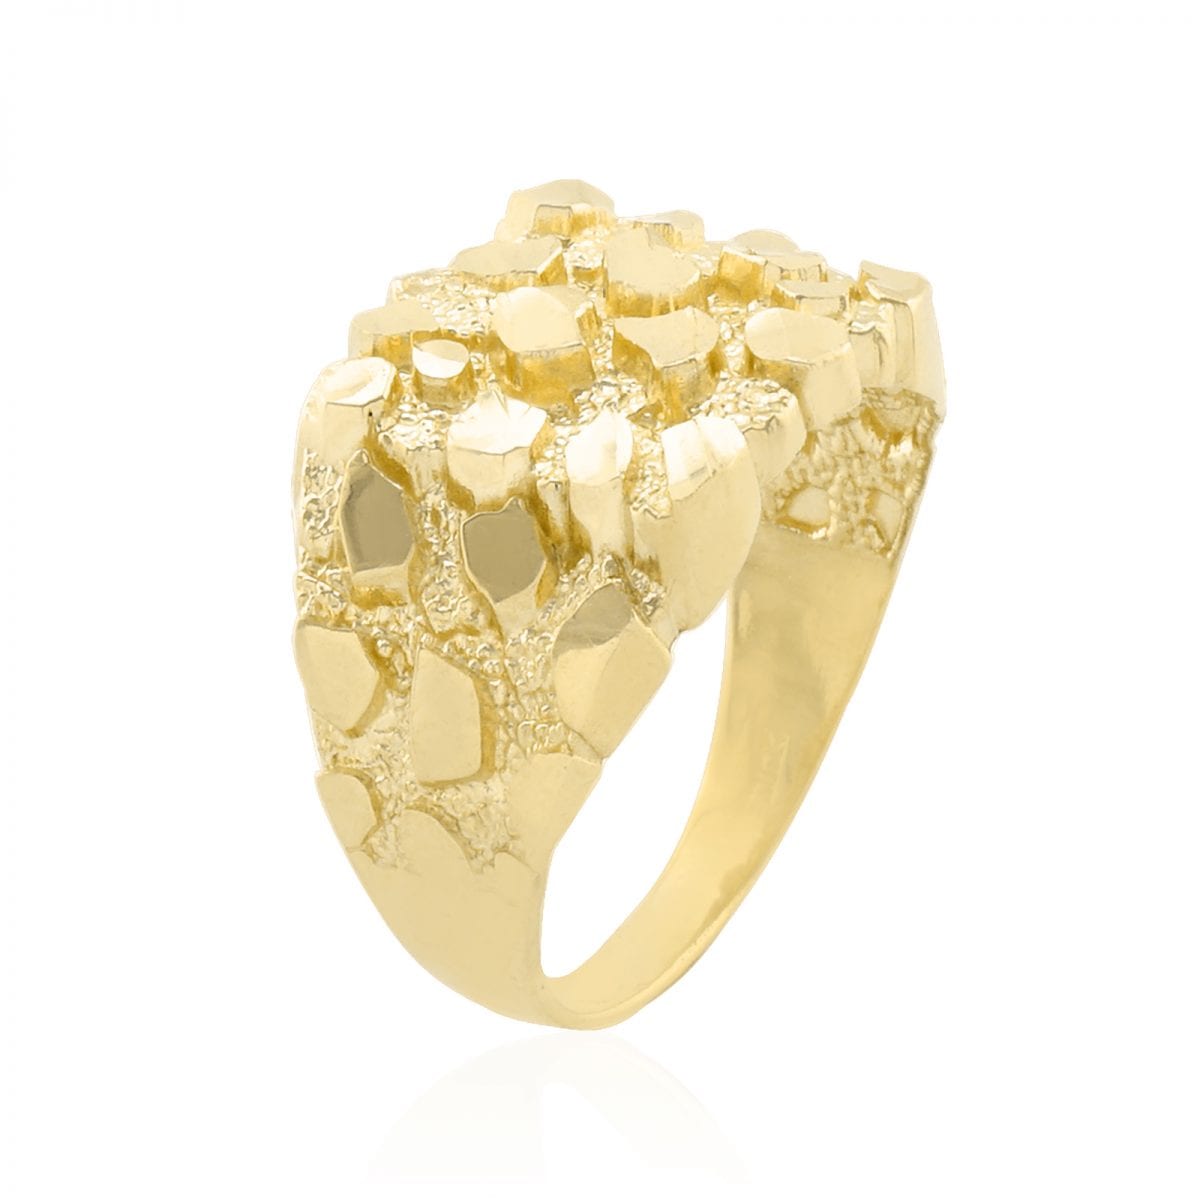 10k Yellow Gold Authentic Nugget Ring Diamond Cut Sizes 6-13